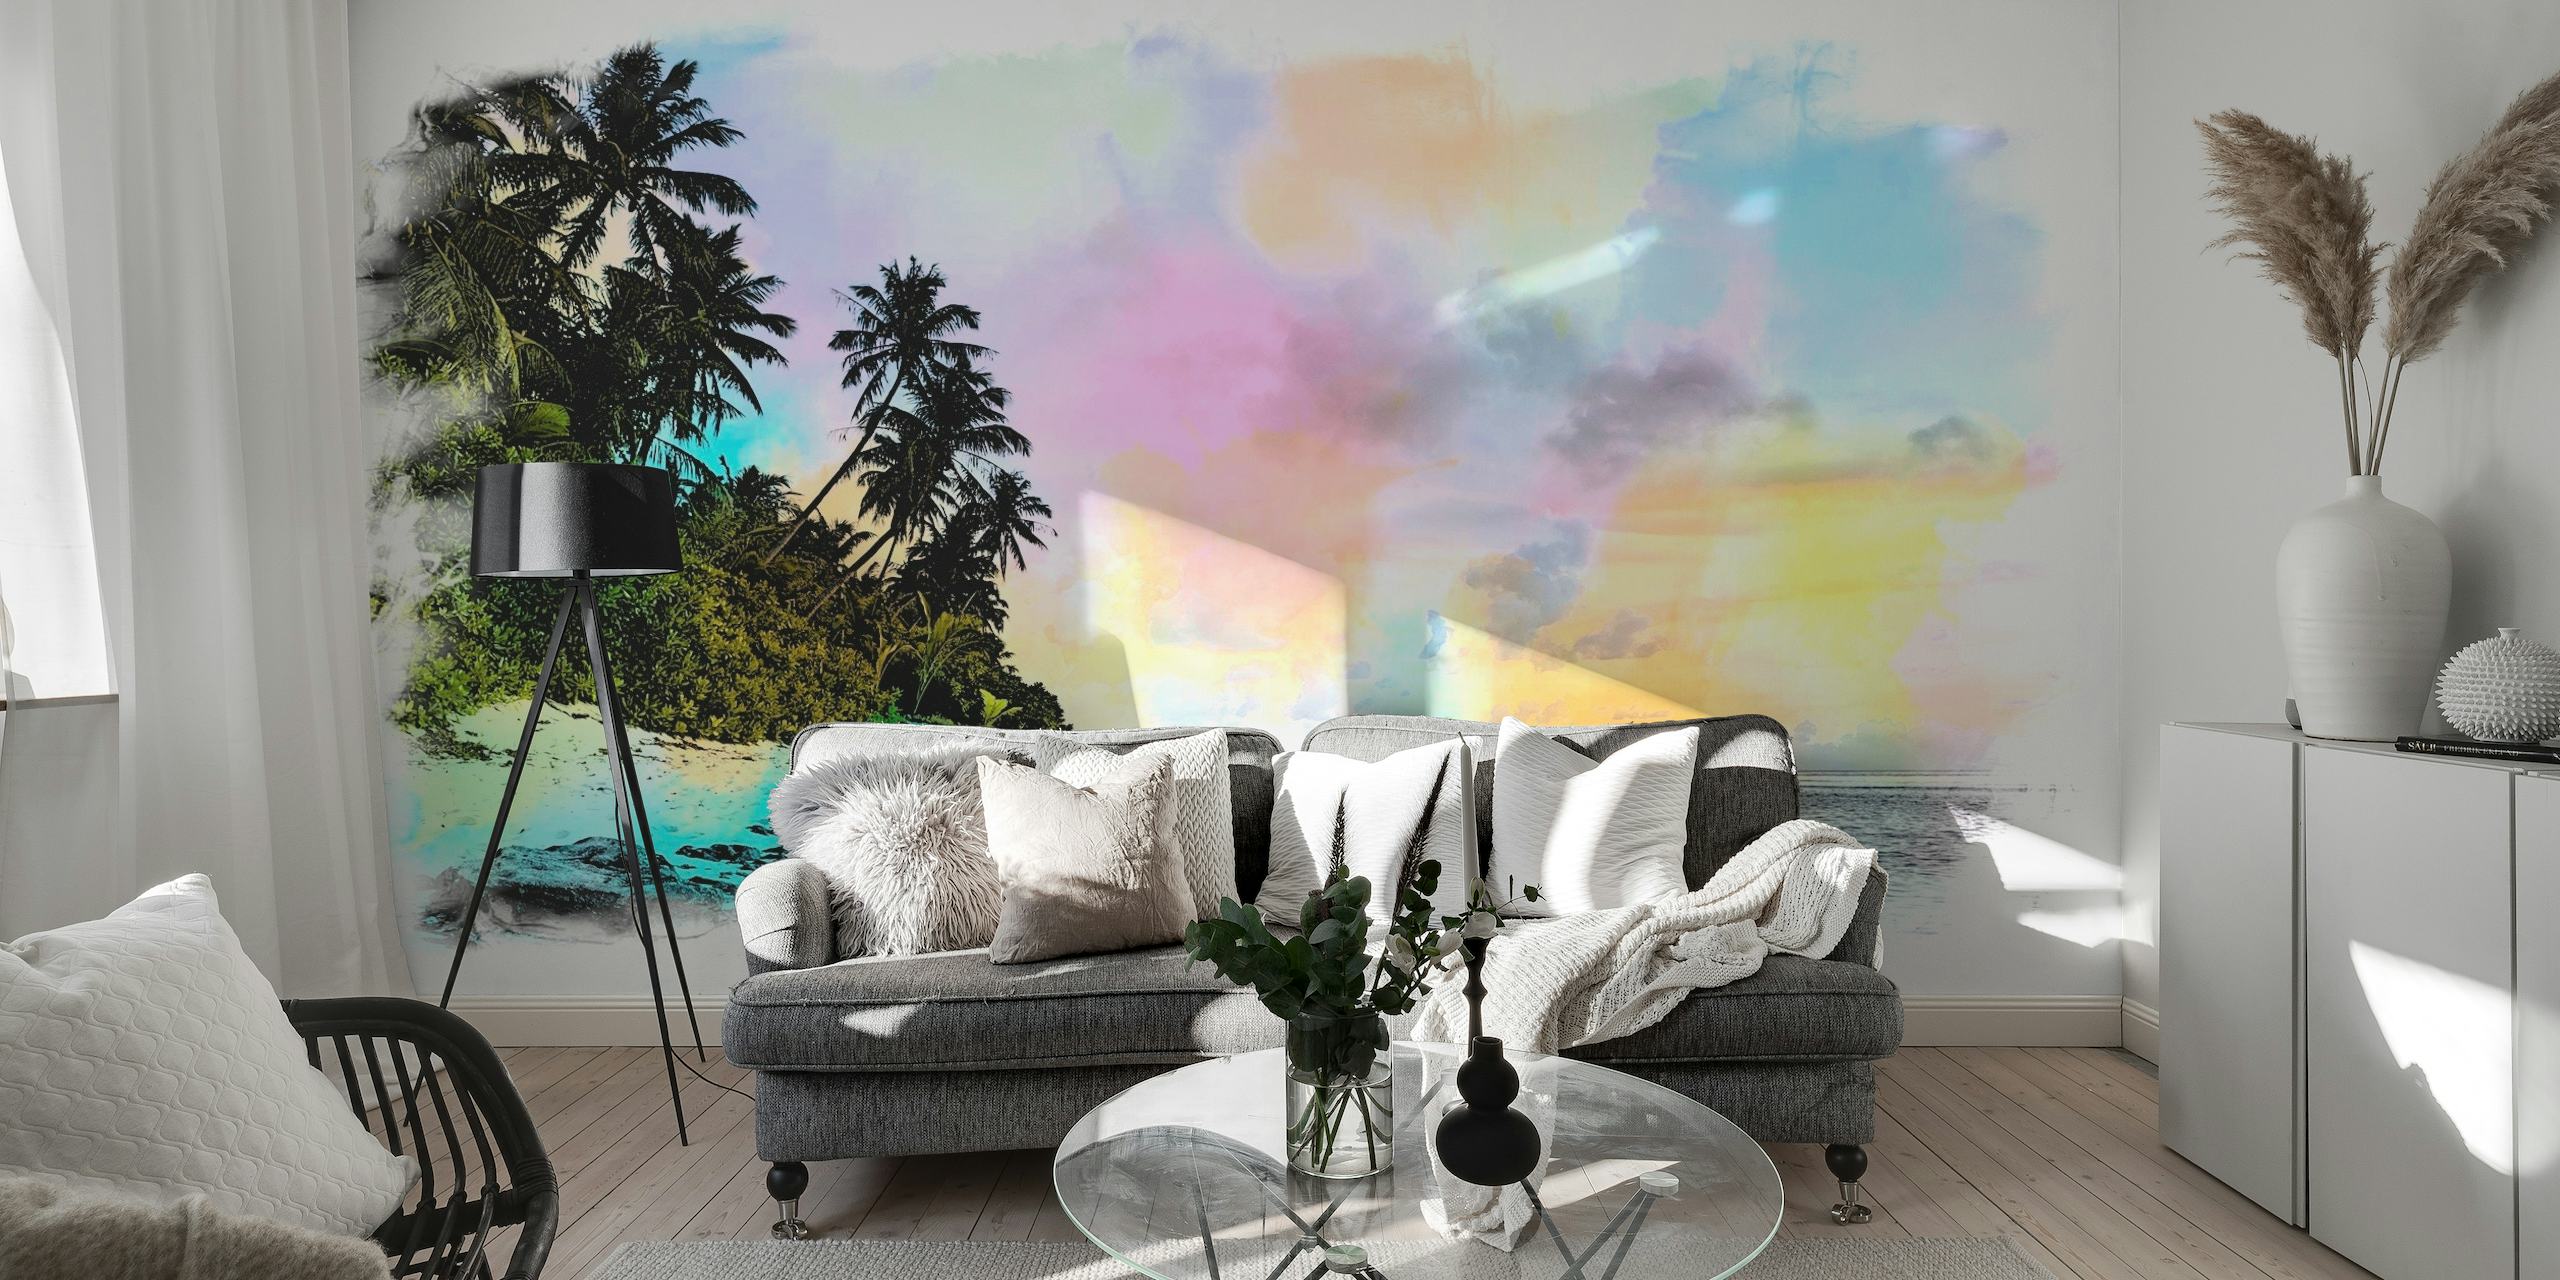 Artistic watercolour depiction of a summer beach with palm trees and pastel skies